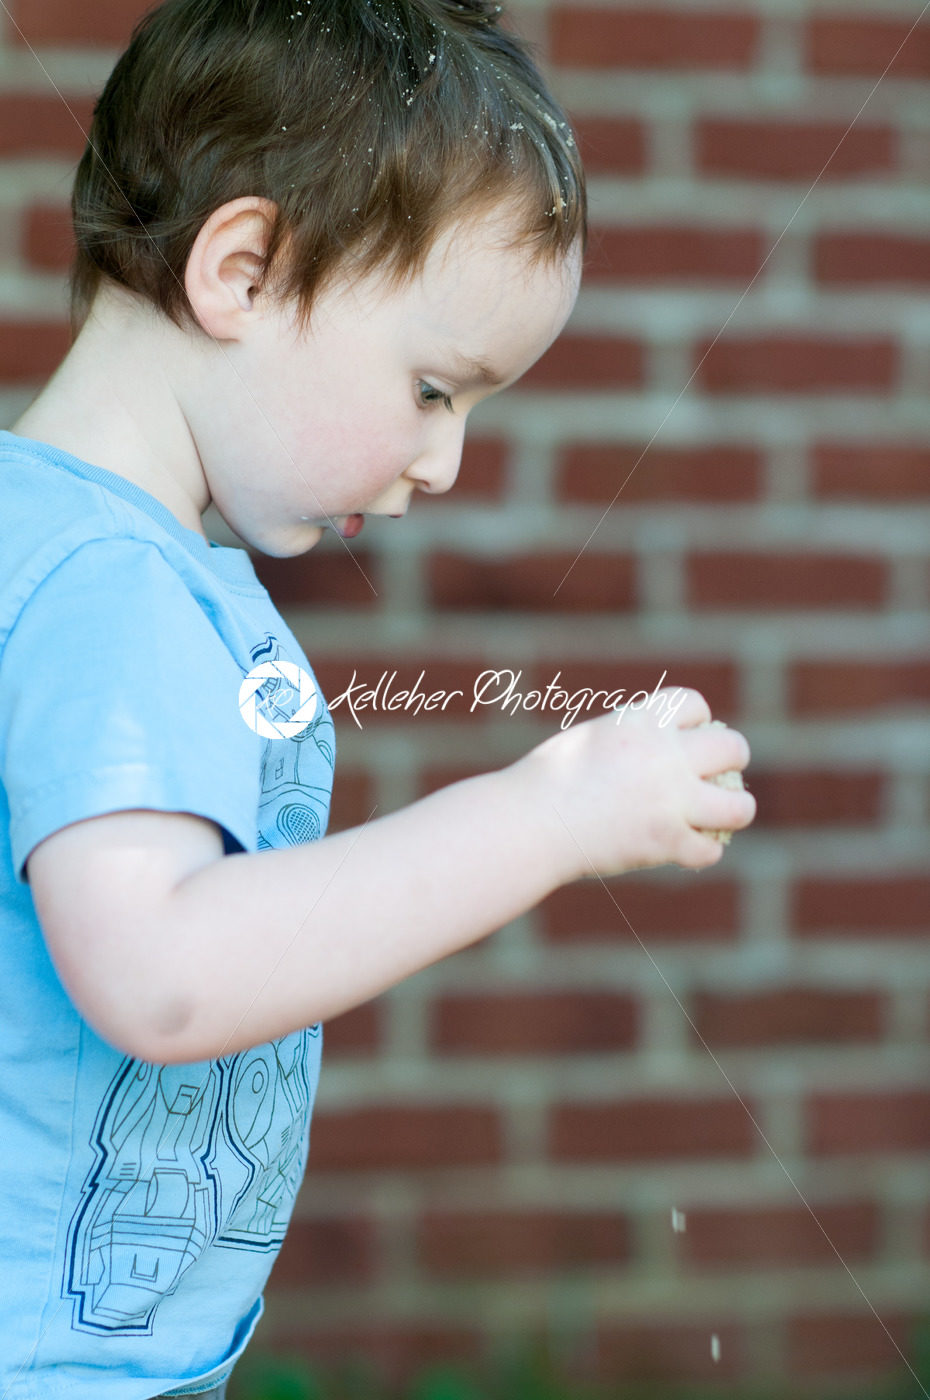 Young toddler boy in front of red birck wall - Kelleher Photography Store